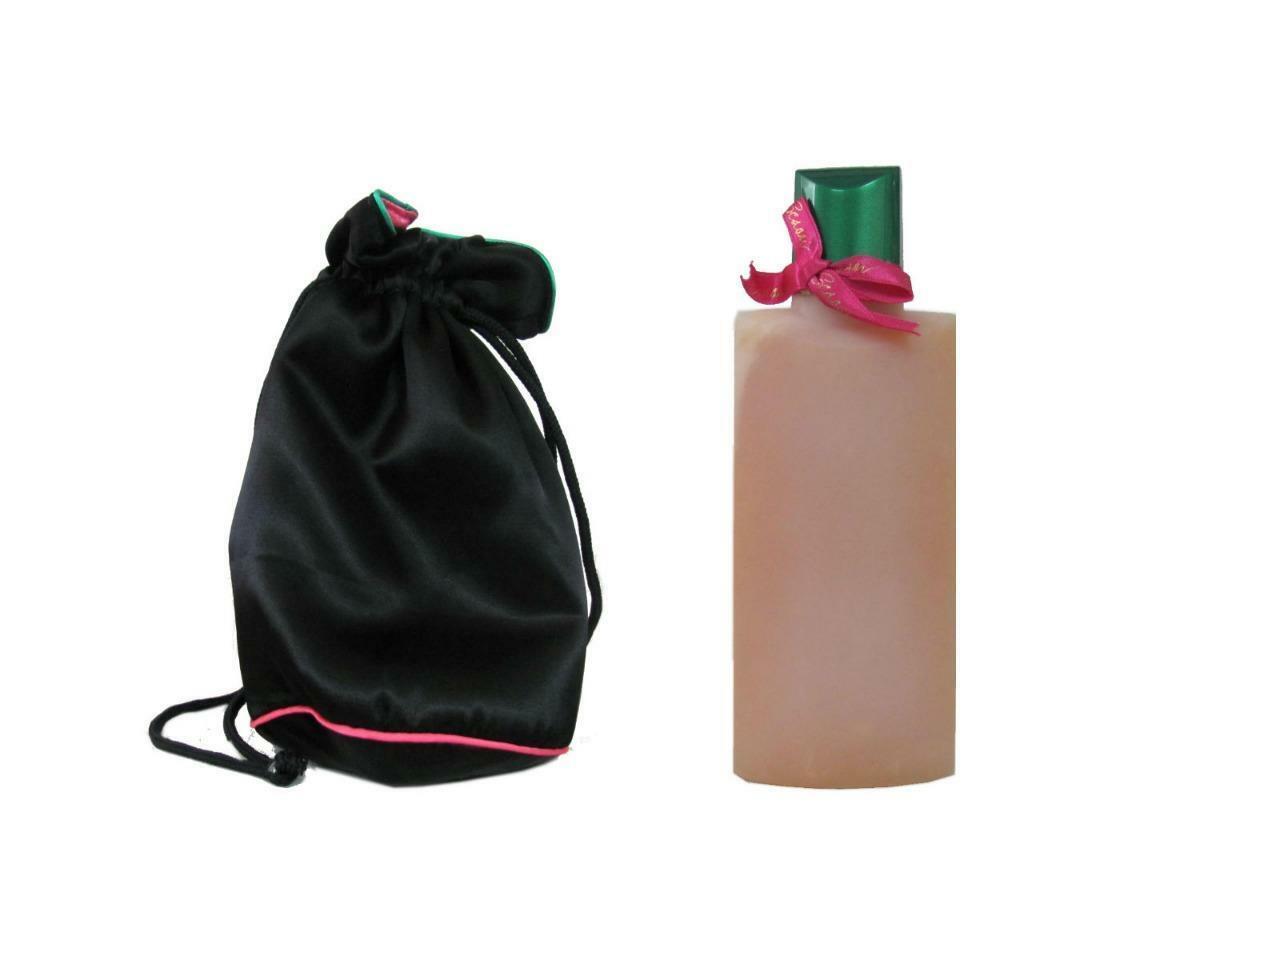 Primary image for Scaasi 8.0 oz Couture Collection Splendid Bath Gel + Bag for Women (UNBOXED)